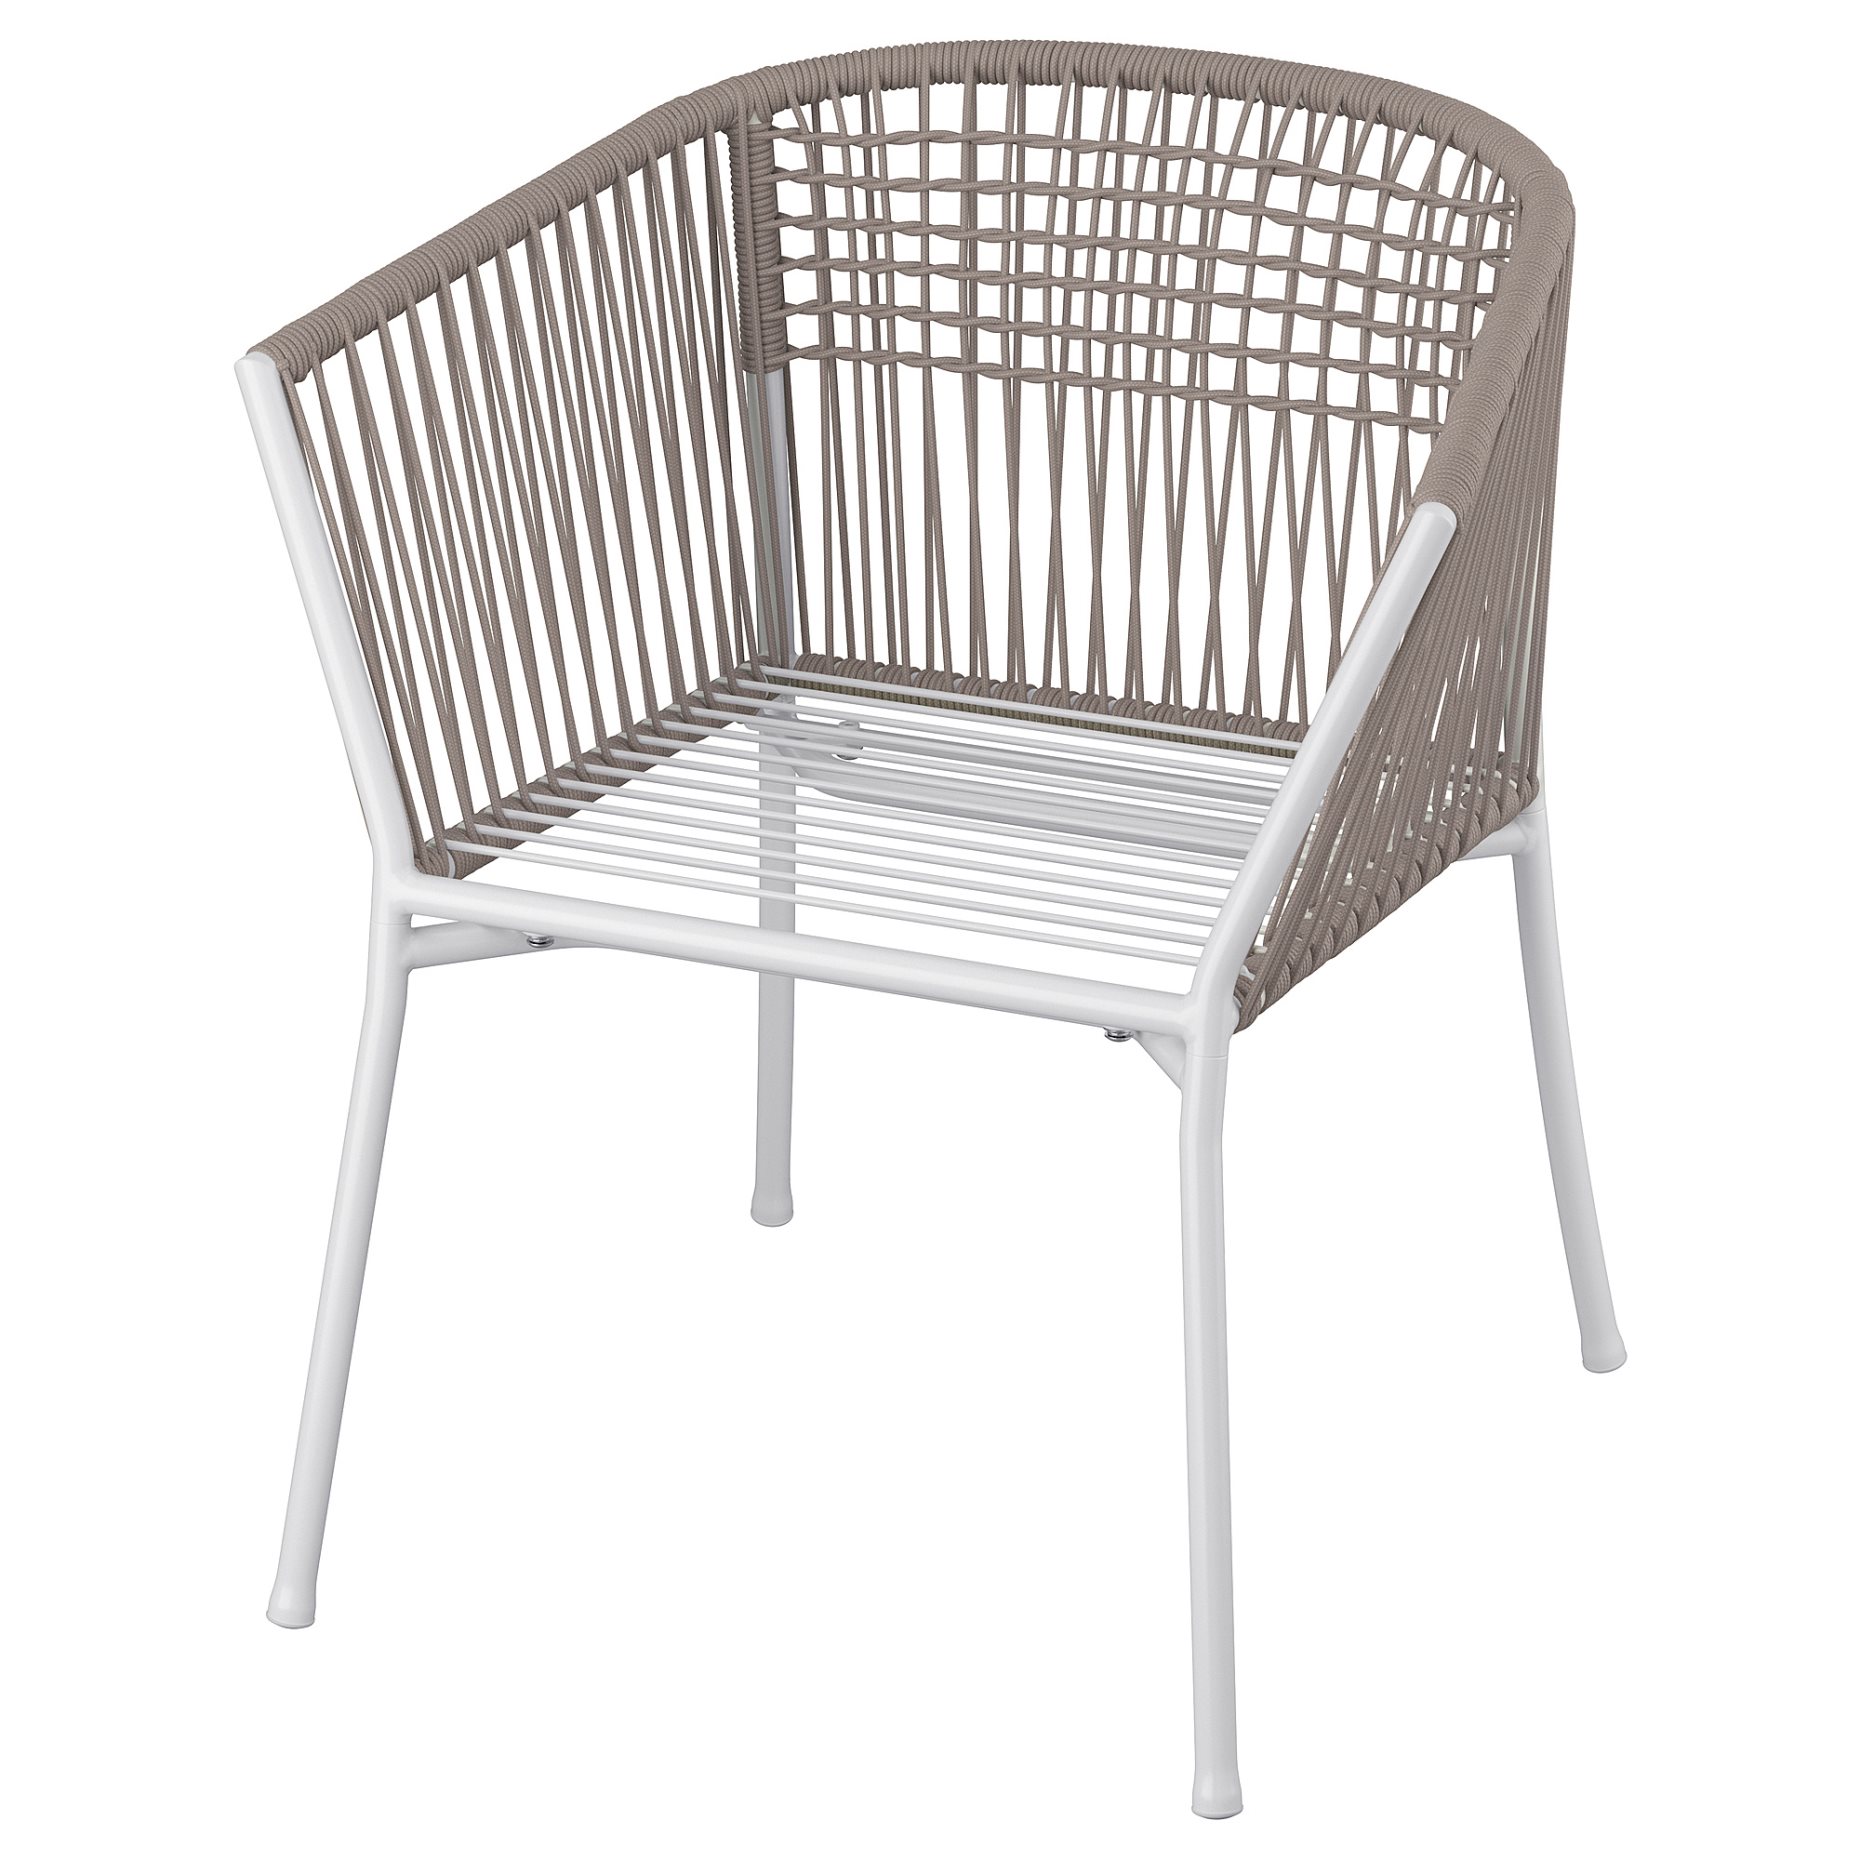 SEGERÖN, chair with armrests, outdoor, 505.108.10